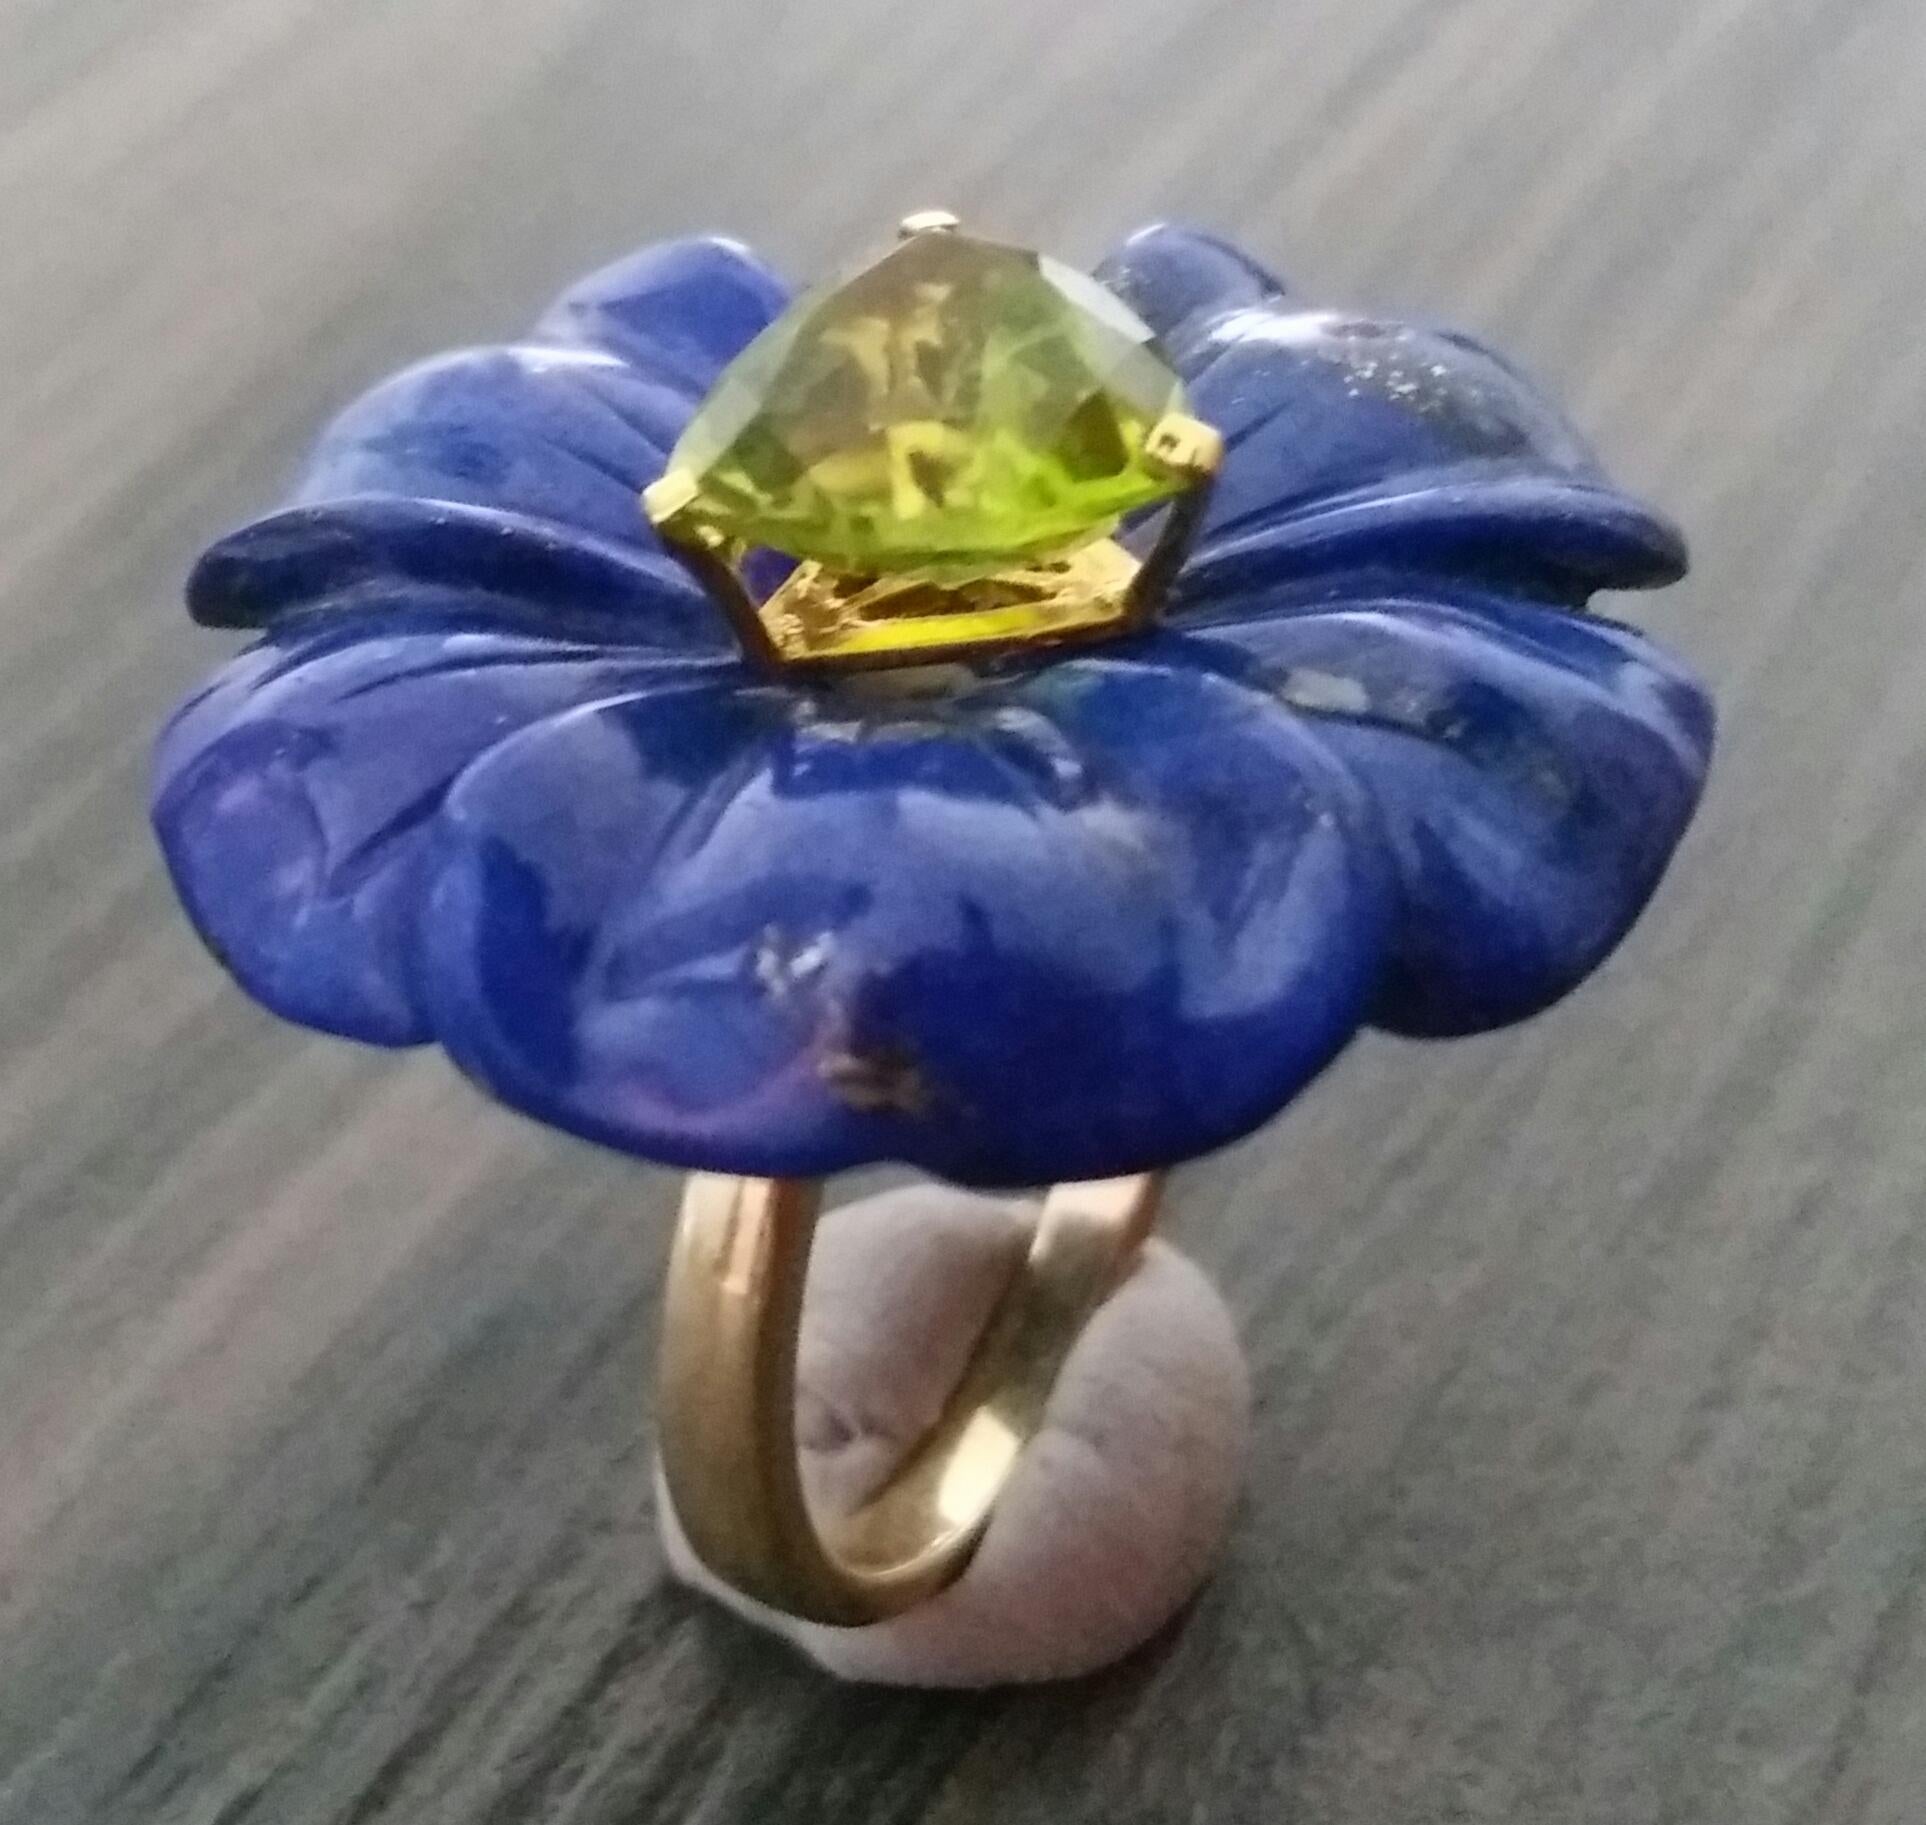 Flower carved Natural Lapis Lazuli of 30 mm. in diameter  with in the center a Trillion Cut Peridot 10 mm size set in solid 14 Kt yellow gold  is mounted on top of a 14 Kt. yellow gold shank. US size # 7 (but resizable according to client